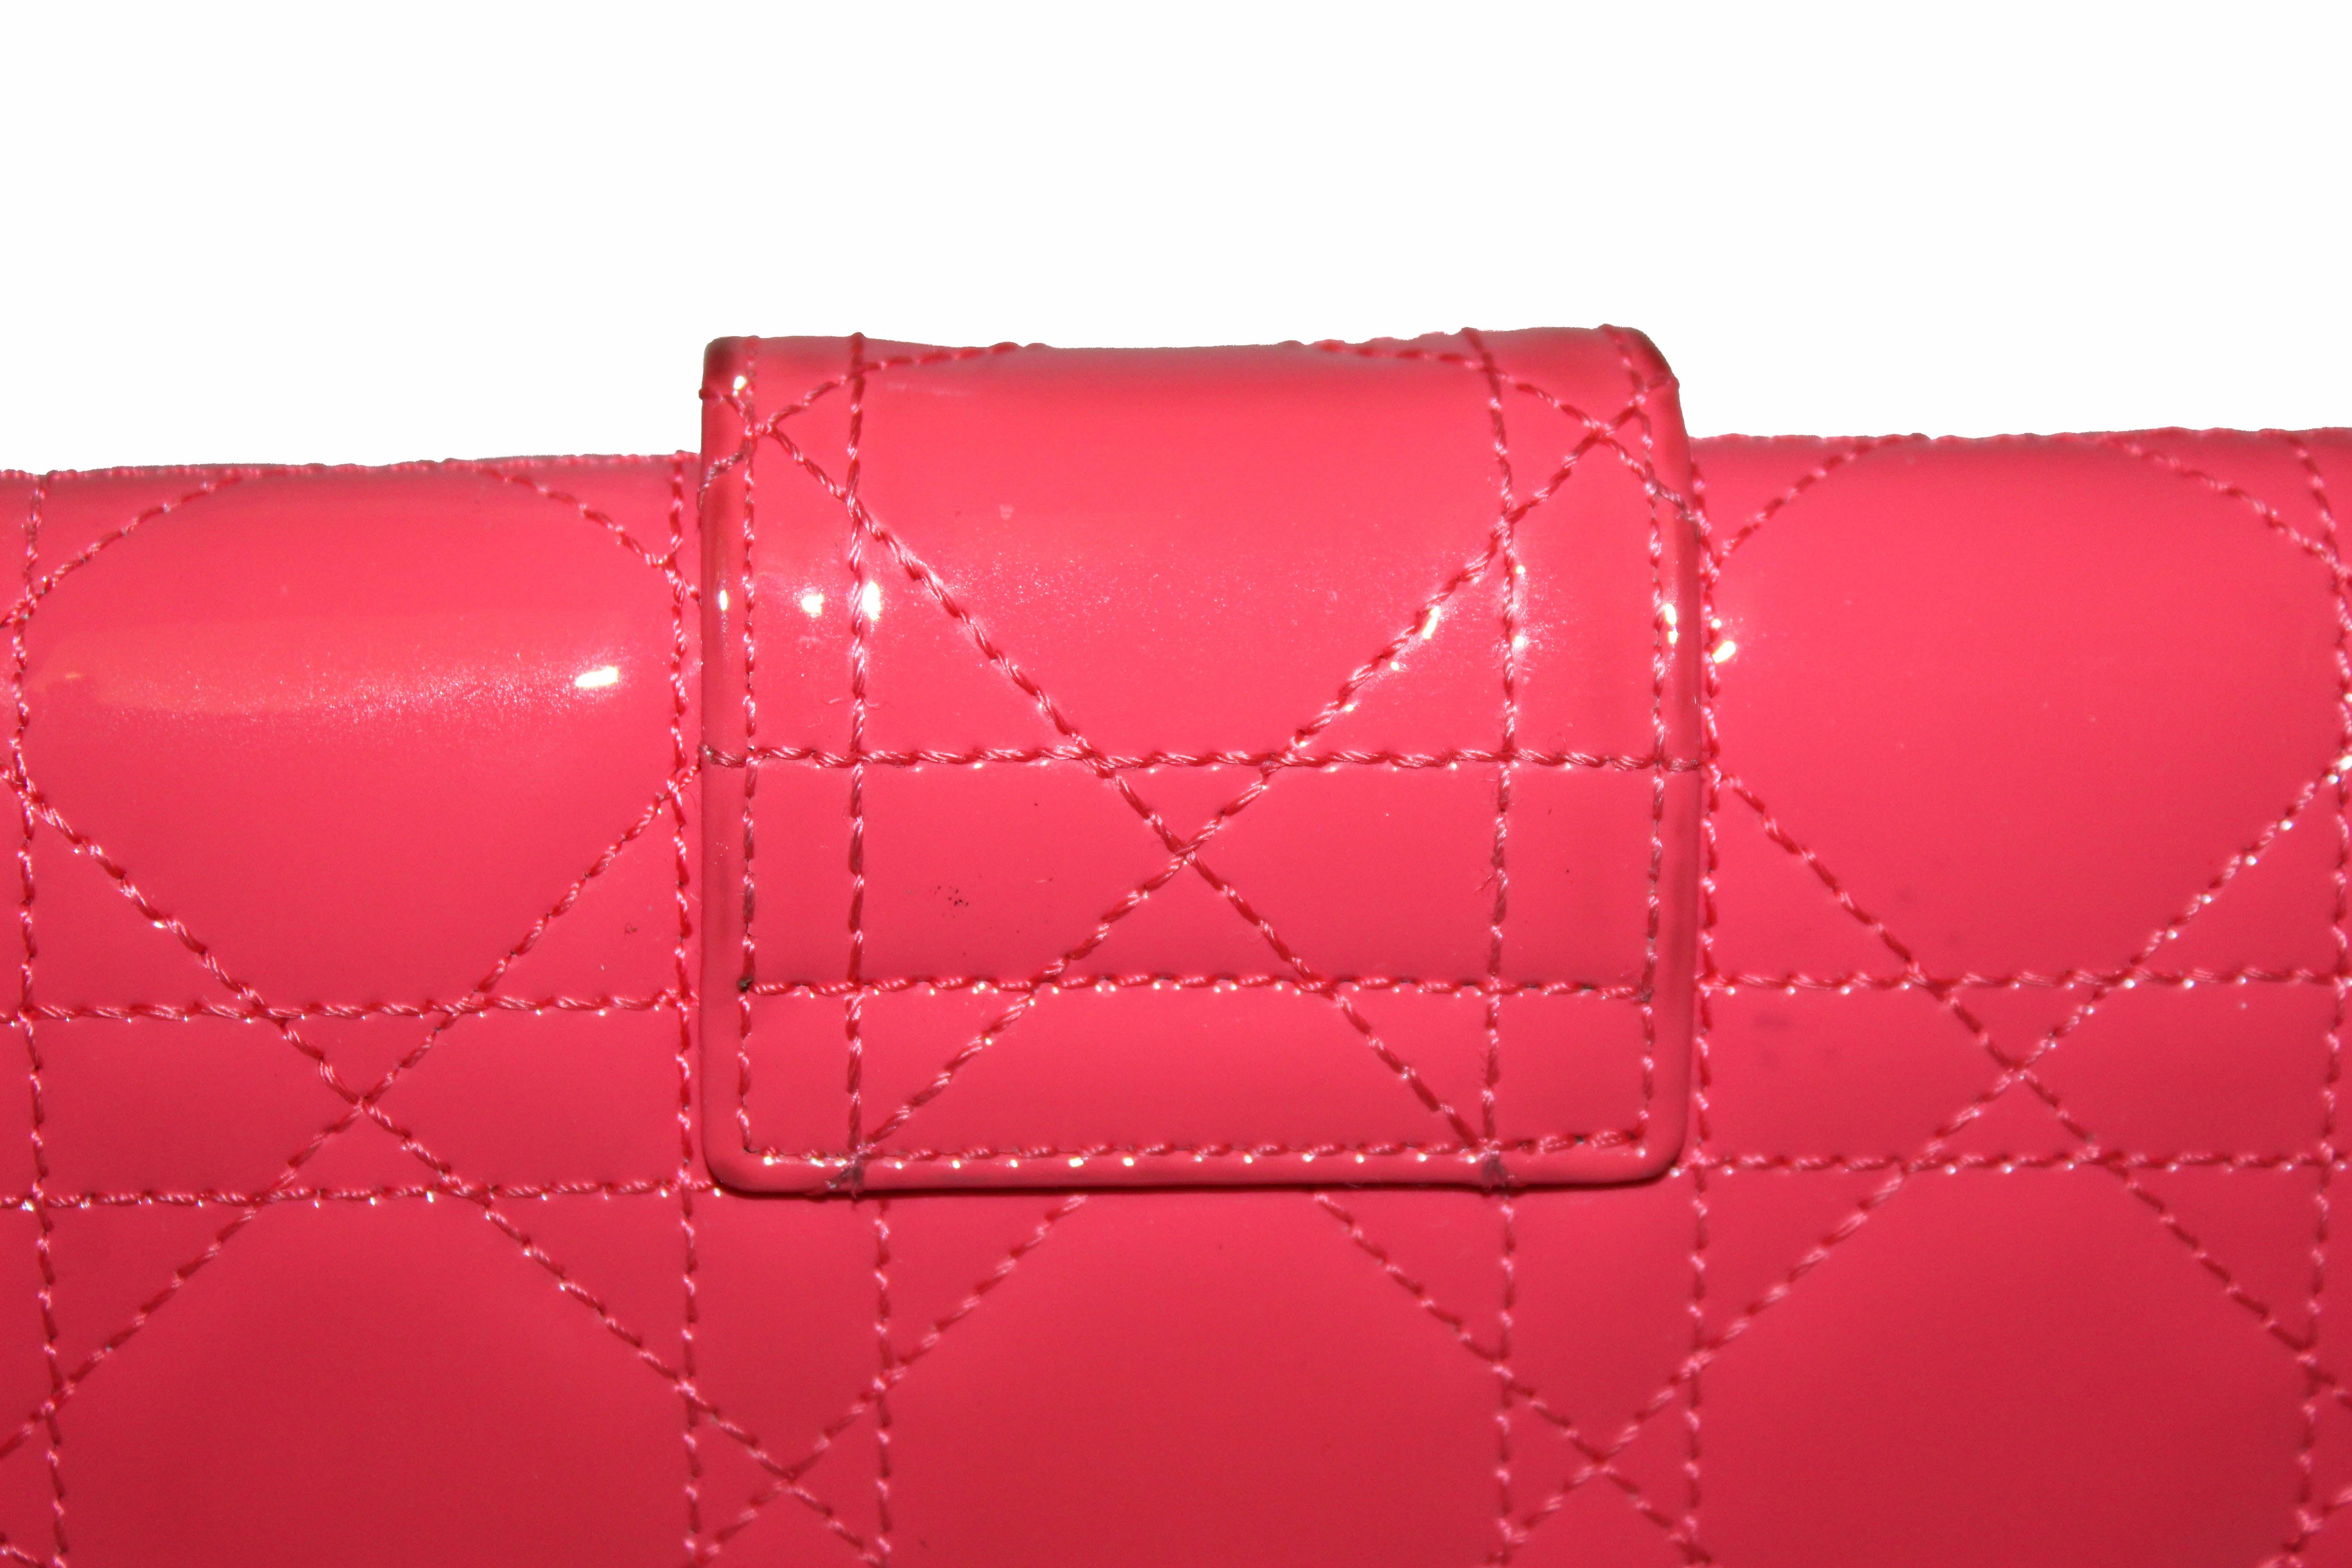 Dior Lady Dior Rendez-Vous Handbag/Clutch in Red Leather Cannage